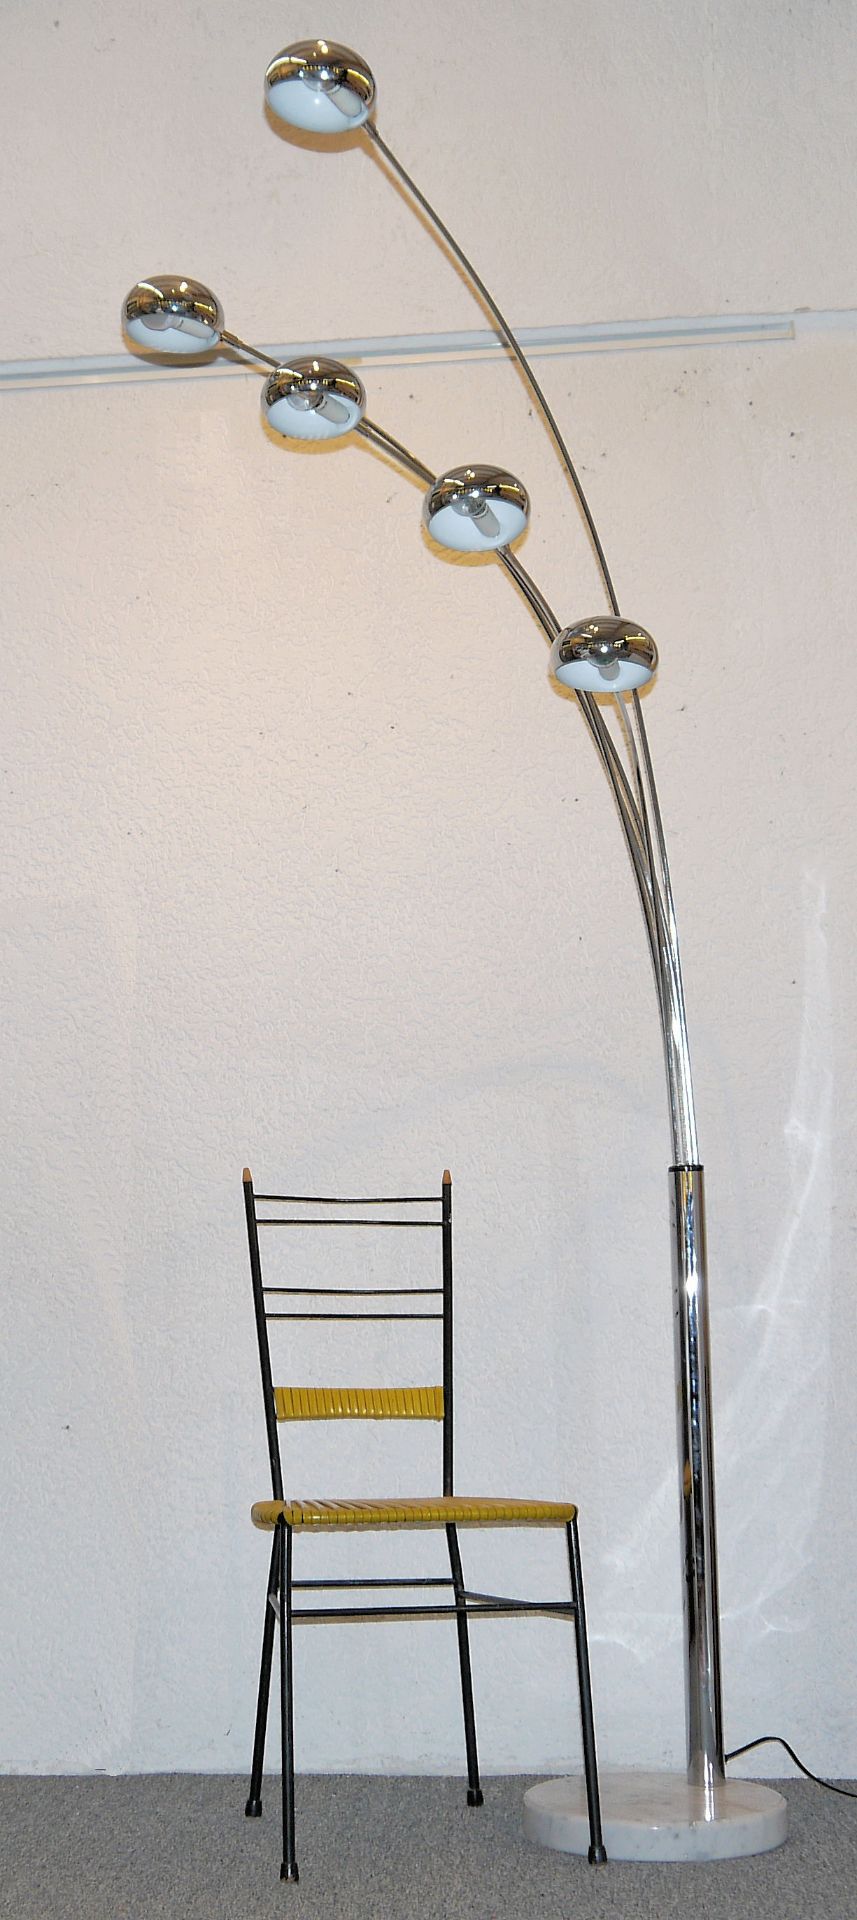 Retro floor lamp "five fingers" and "Spagetti" chair from the 1950s  - Image 2 of 2